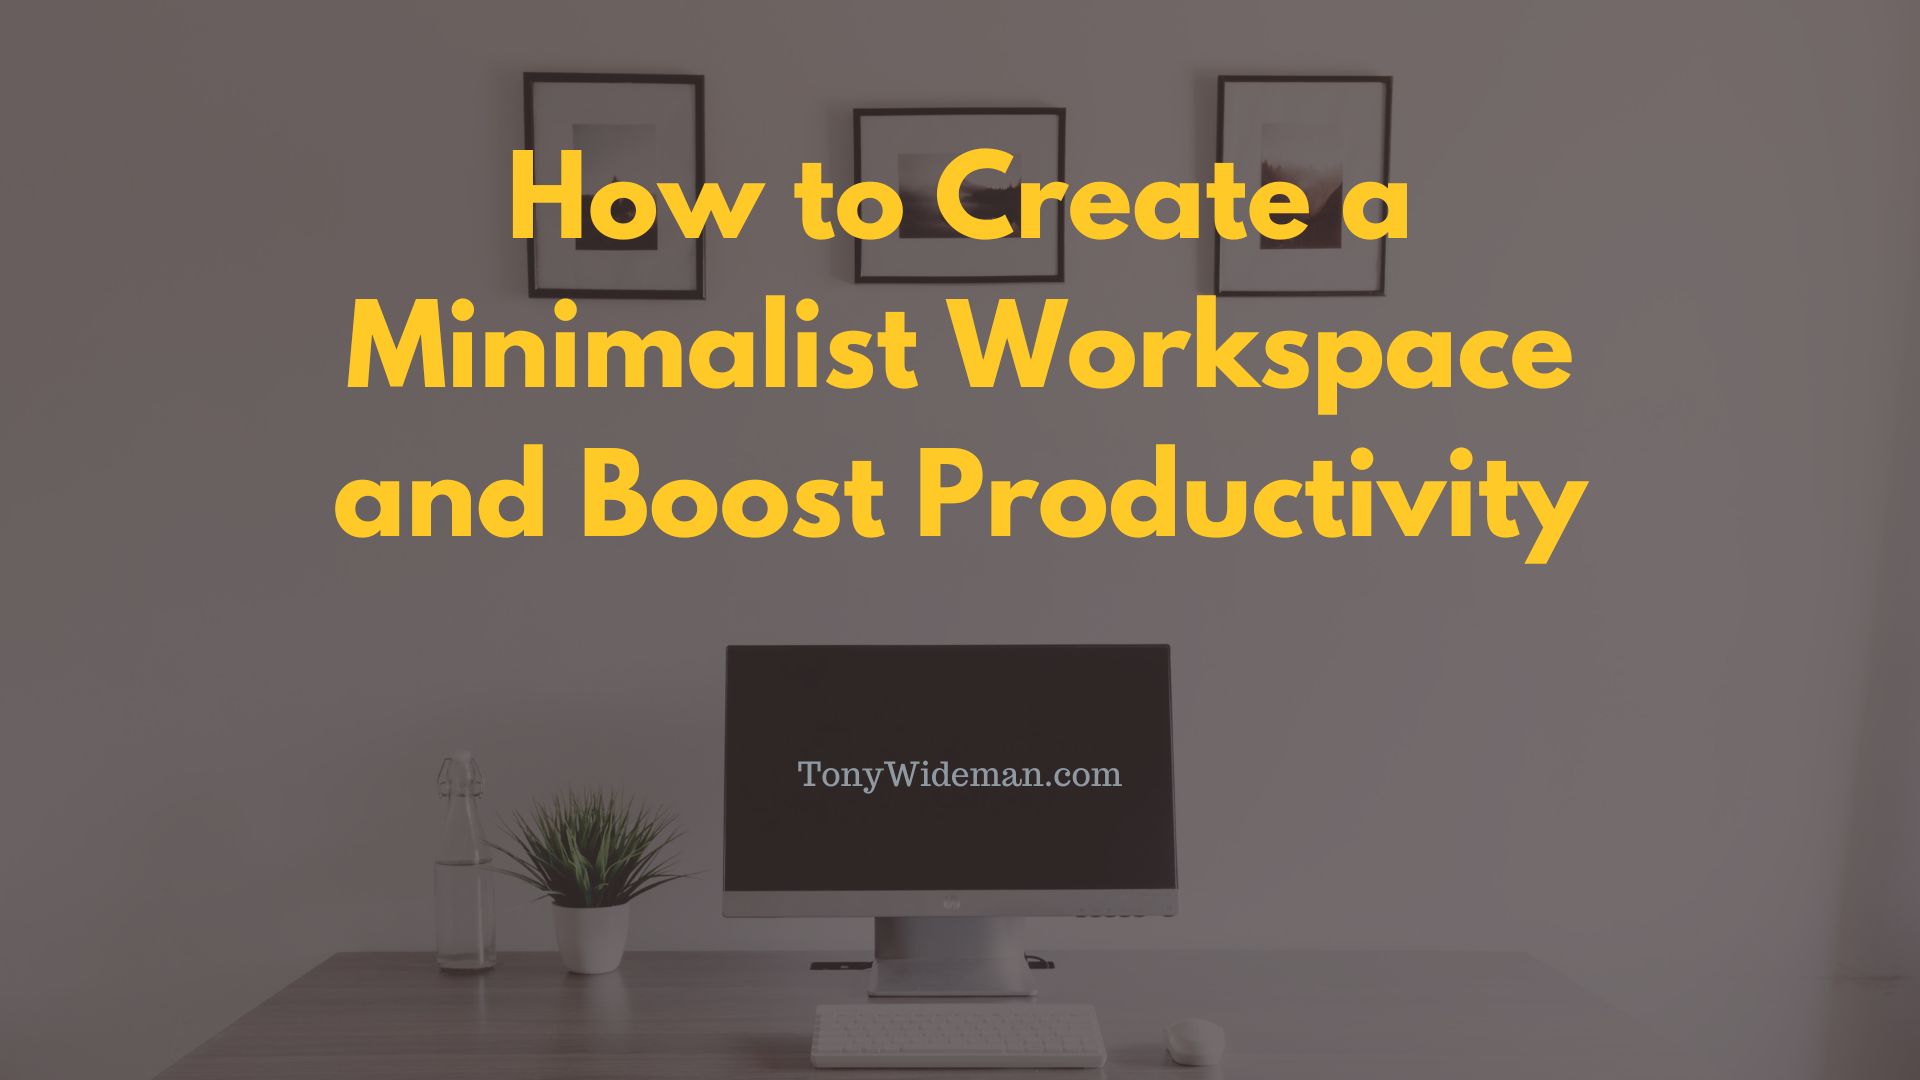 How to Create a Minimalist Workspace and Boost Productivity